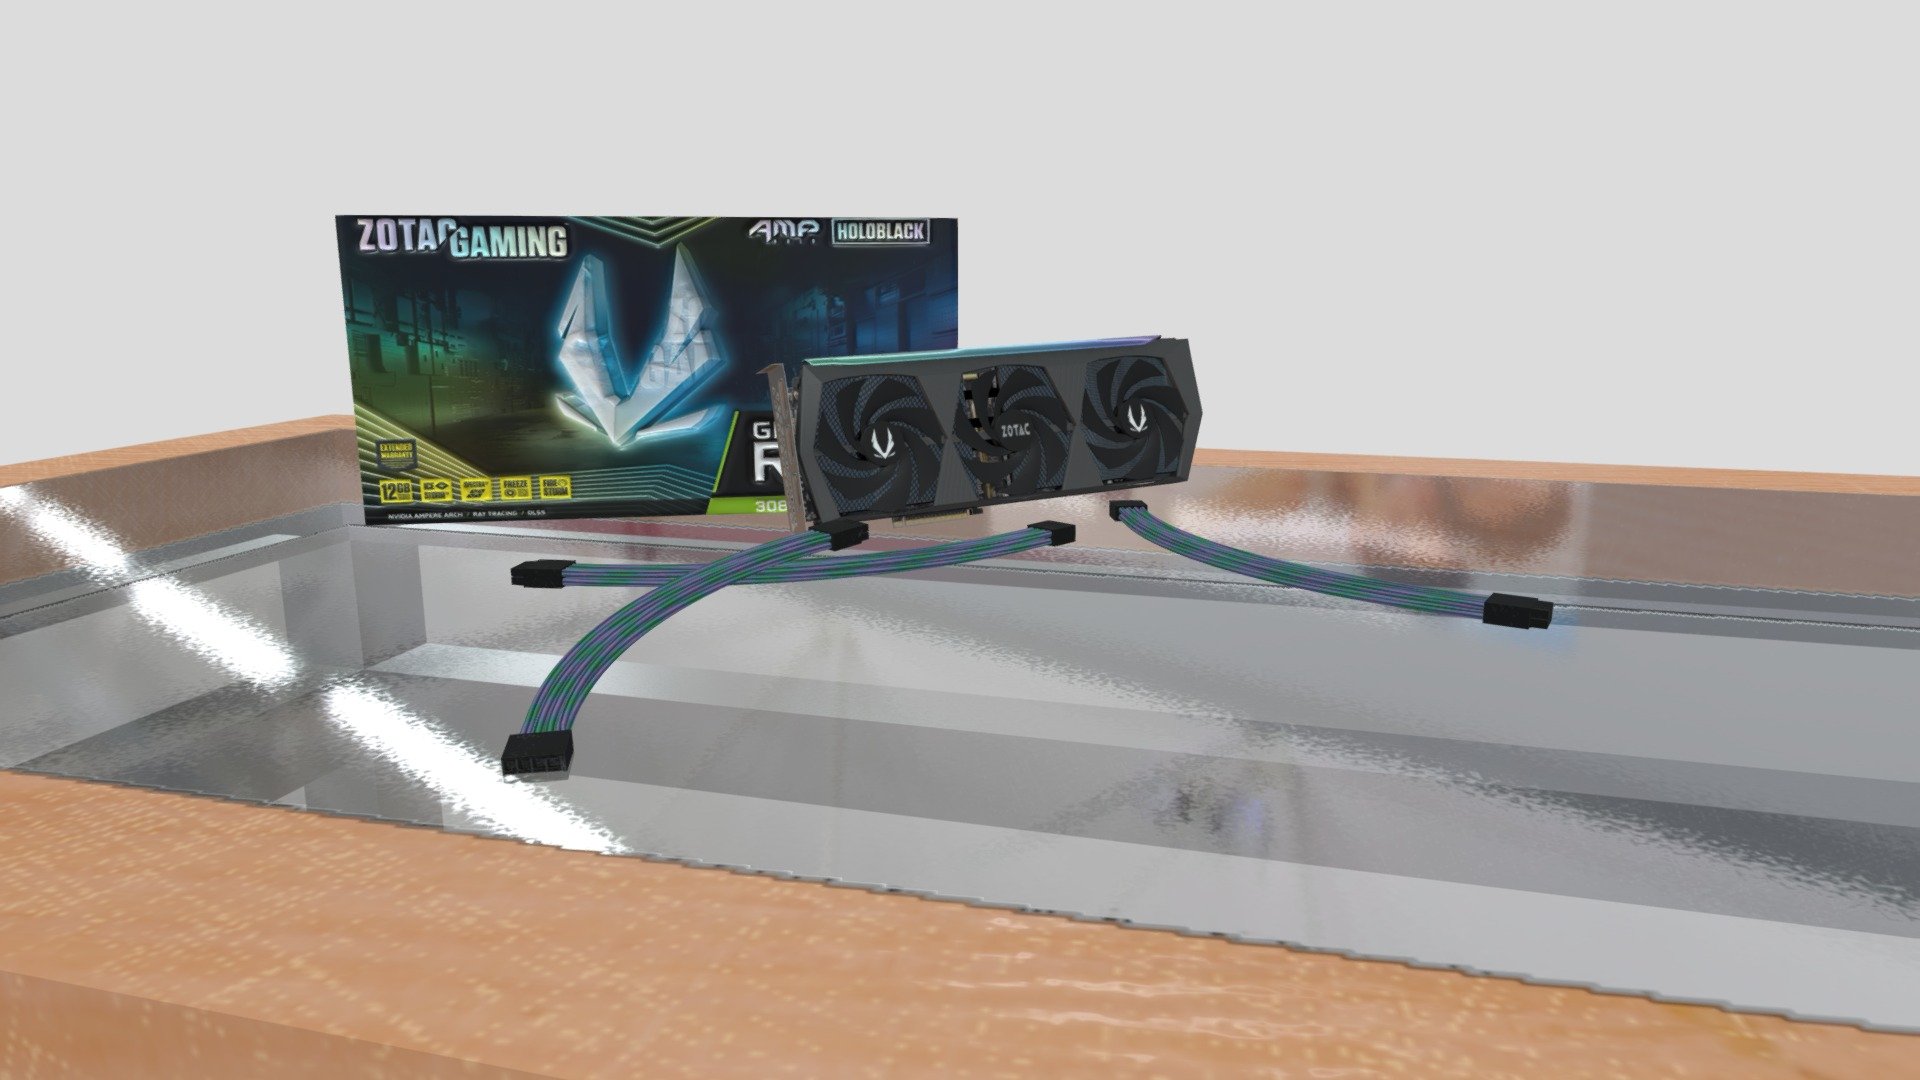 Model of the zotac gaming nvidia rtx 3080 ti graphic card together with its box and some custom pcie cables placed on a desk. The model and textures of the box and graphic card may not be 100% accurate to the original ones 3d model